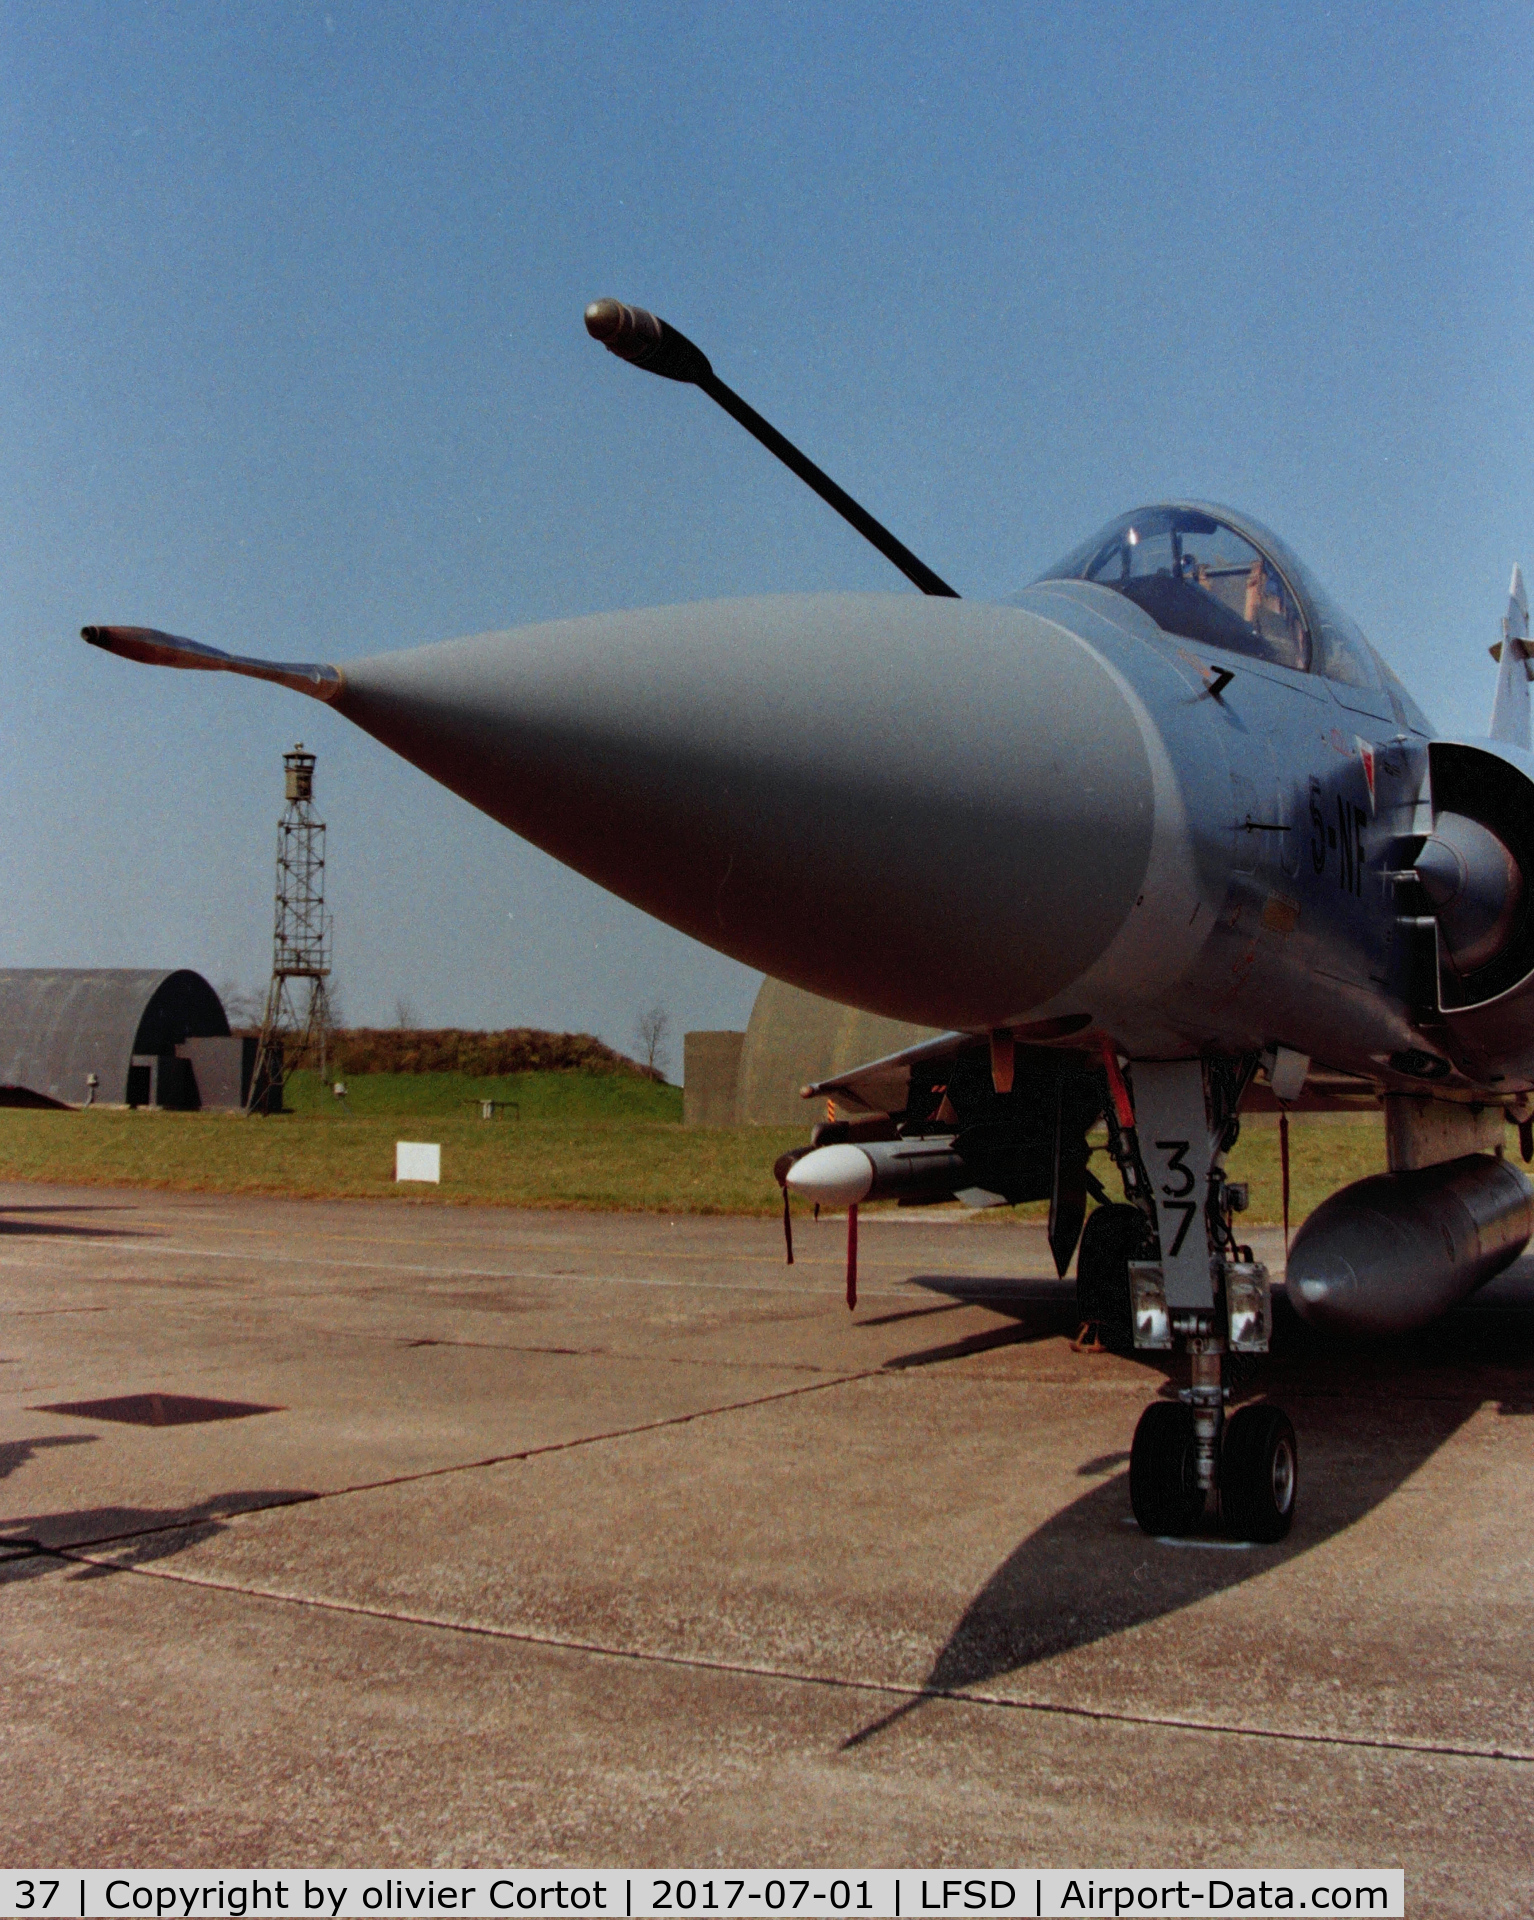 37, Dassault Mirage 2000C C/N 37, Displayed for the arrival of the -5 2000 variant at Dijon airbase, early 2000's